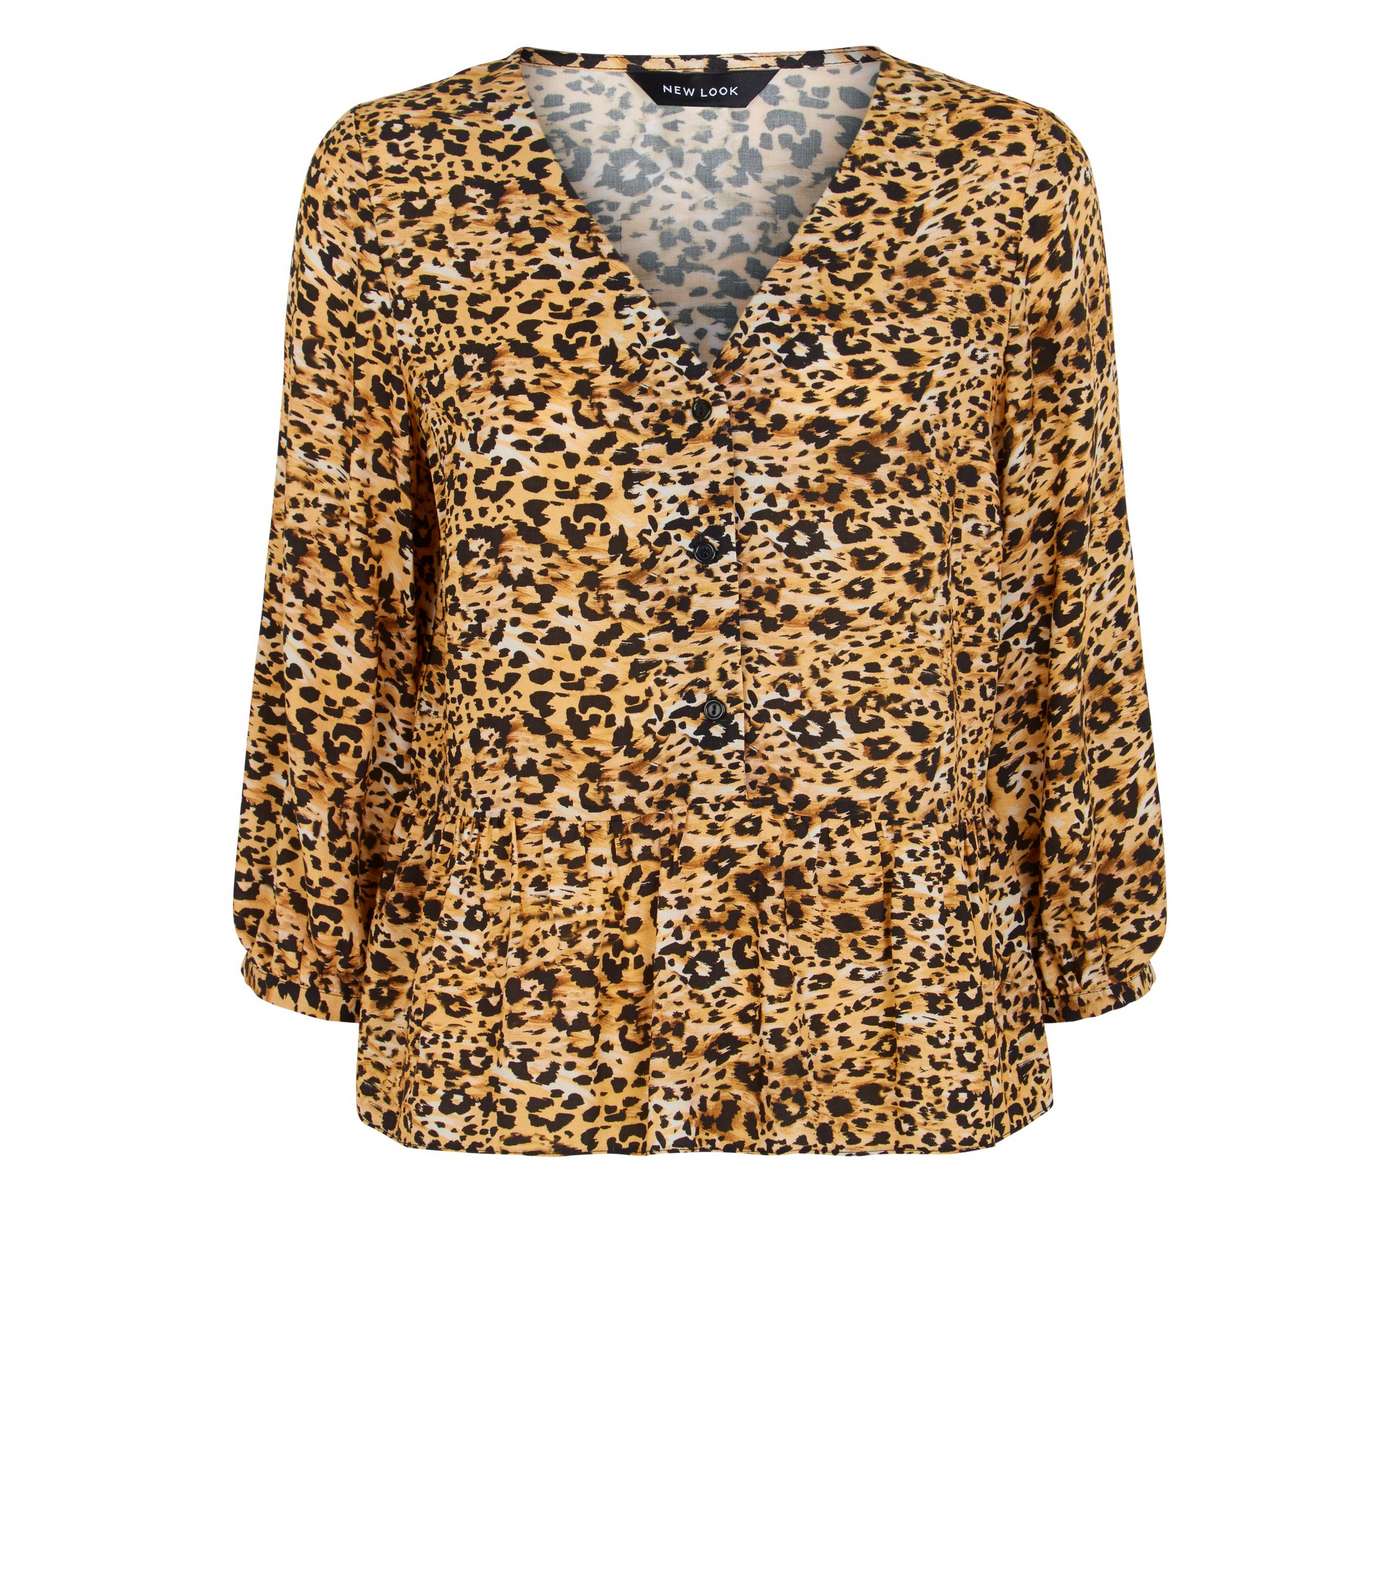 Brown Leopard Print Button Up Top Image 4